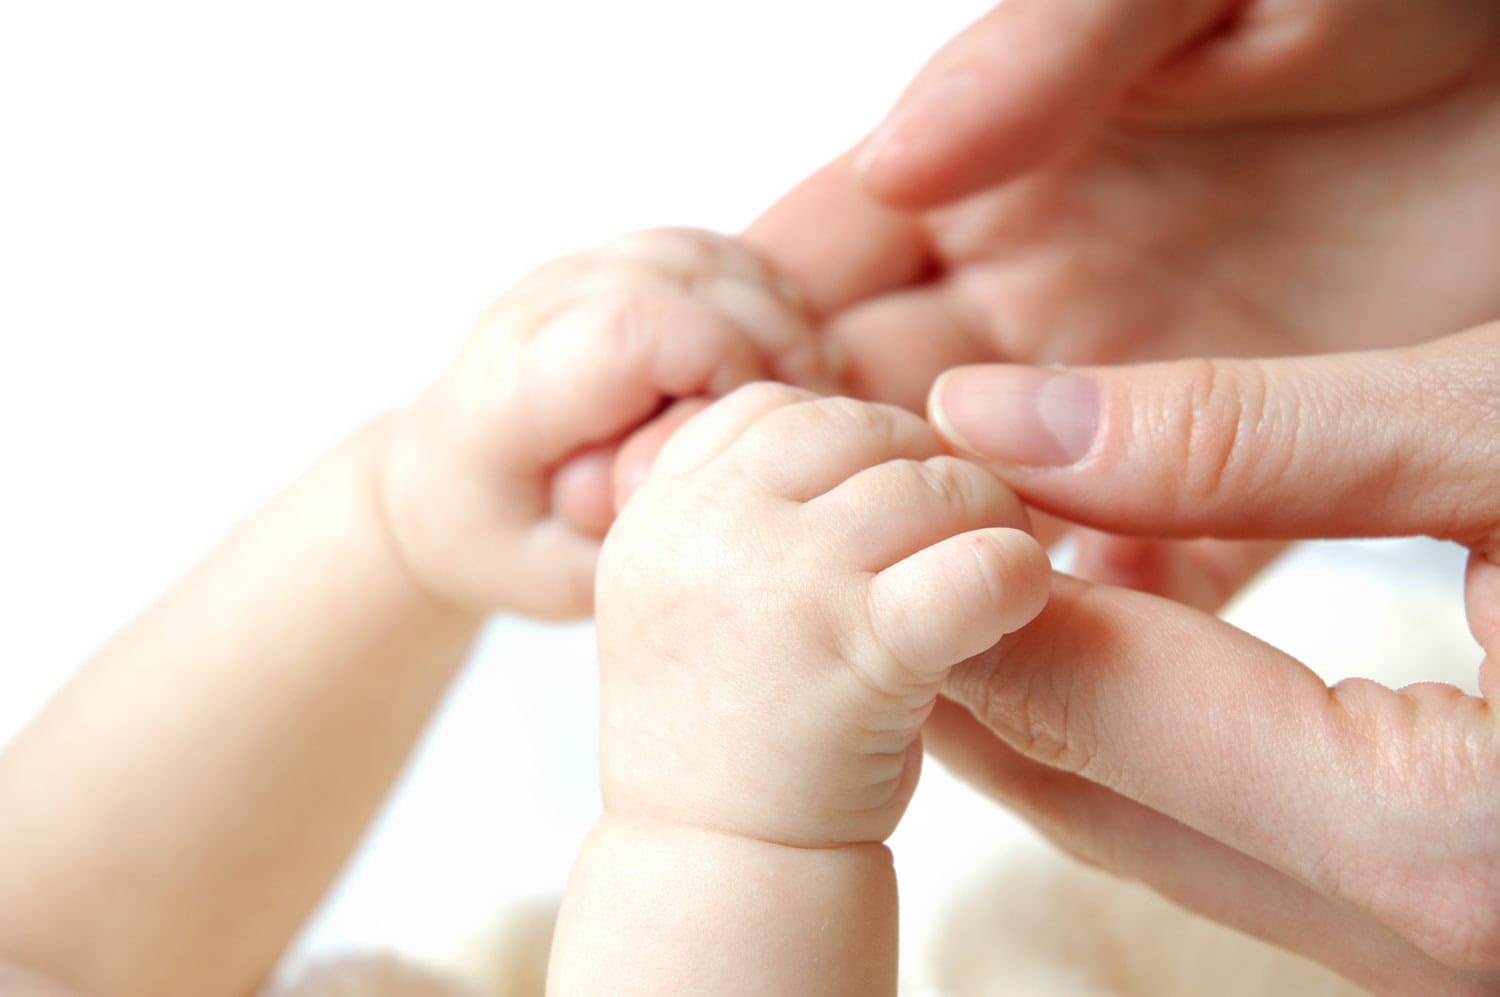 A newborn baby holding onto an to her Newborn Care Specialists fingers with a gentle grip